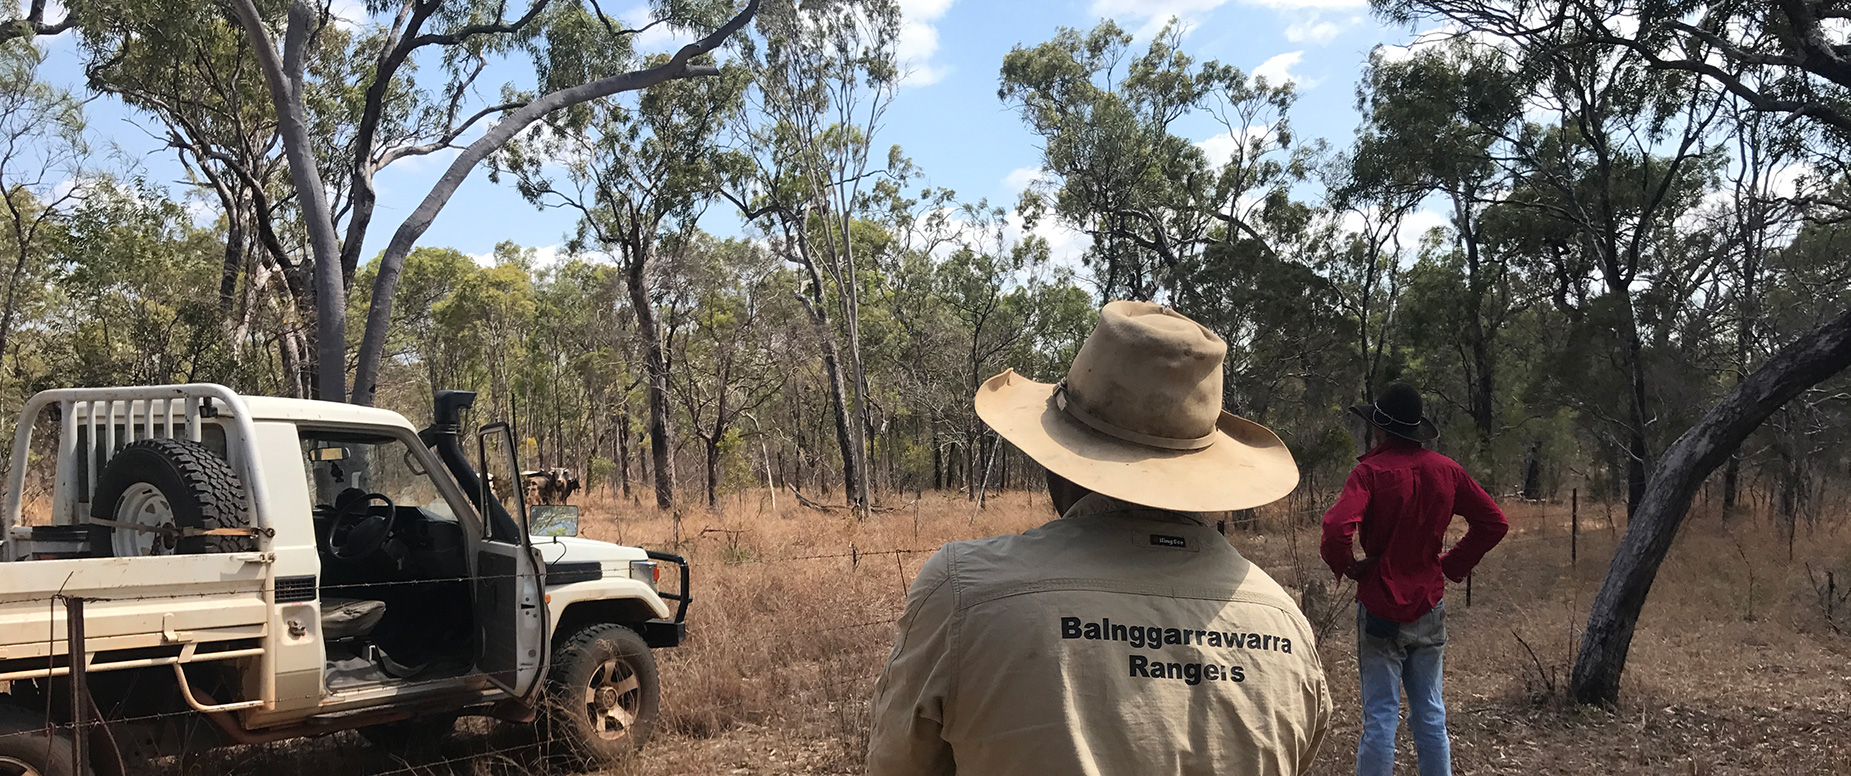 Balnggarrawarra Rangers working on Normanby Station to improve land condition and water quality